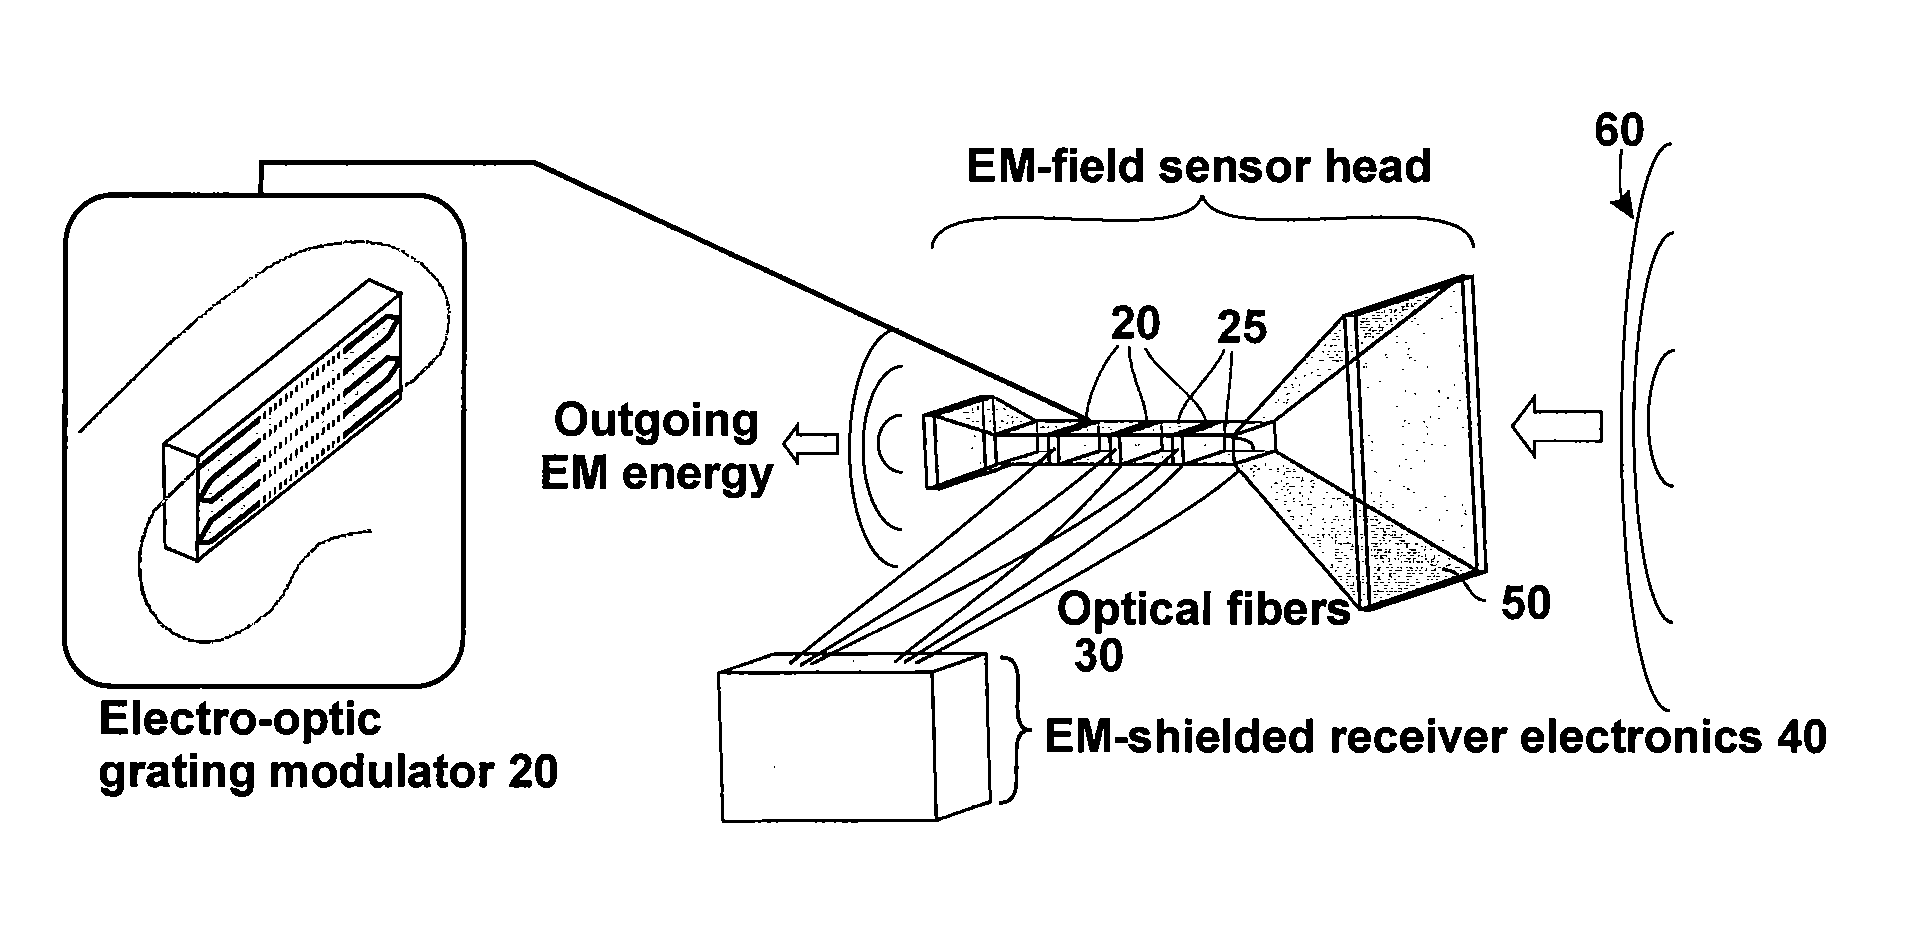 Microwave receiver front-end assembly and array